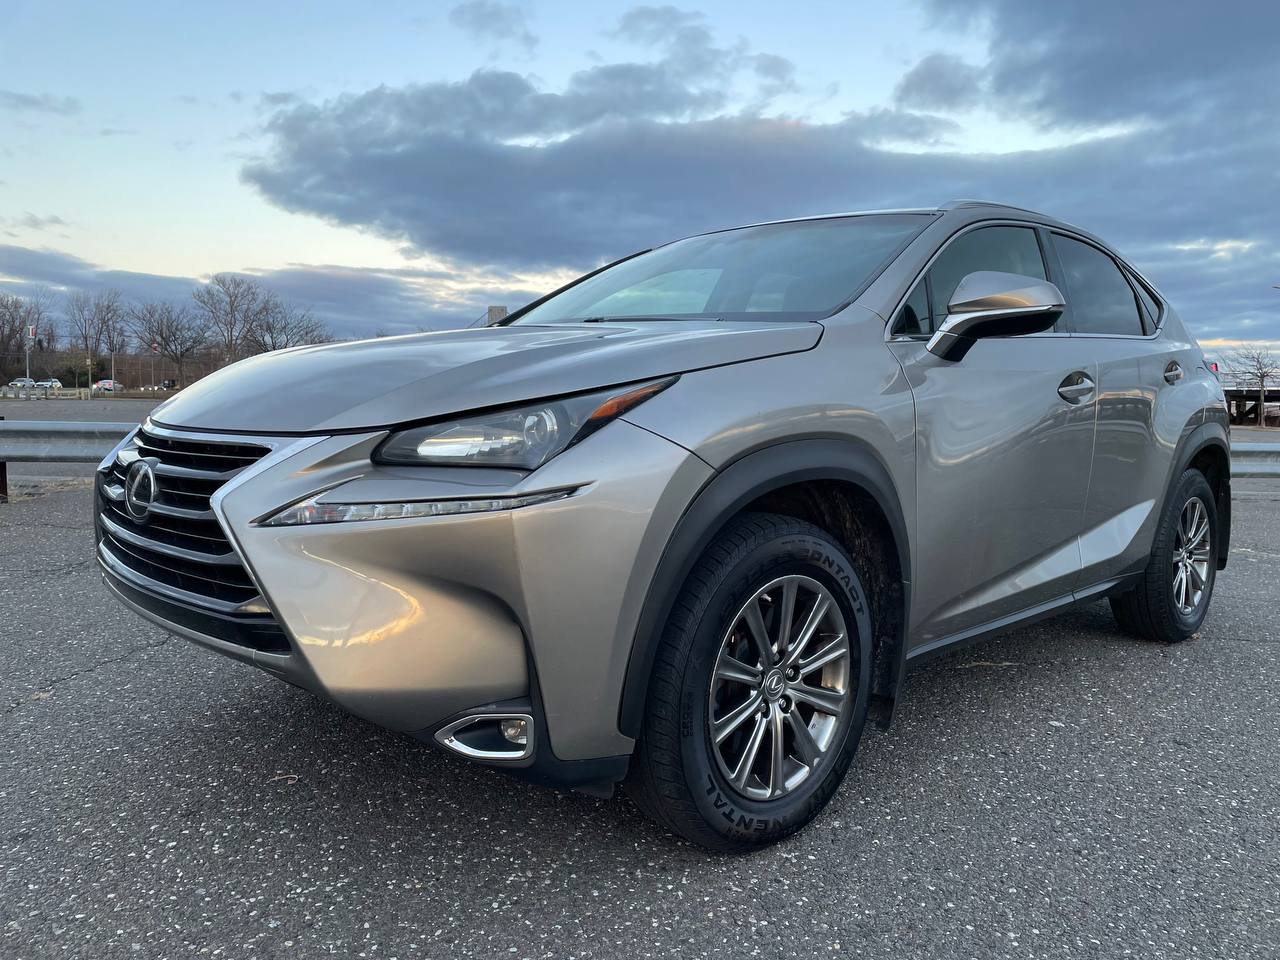 Used Car - 2017 Lexus NX 200t for Sale in Staten Island, NY